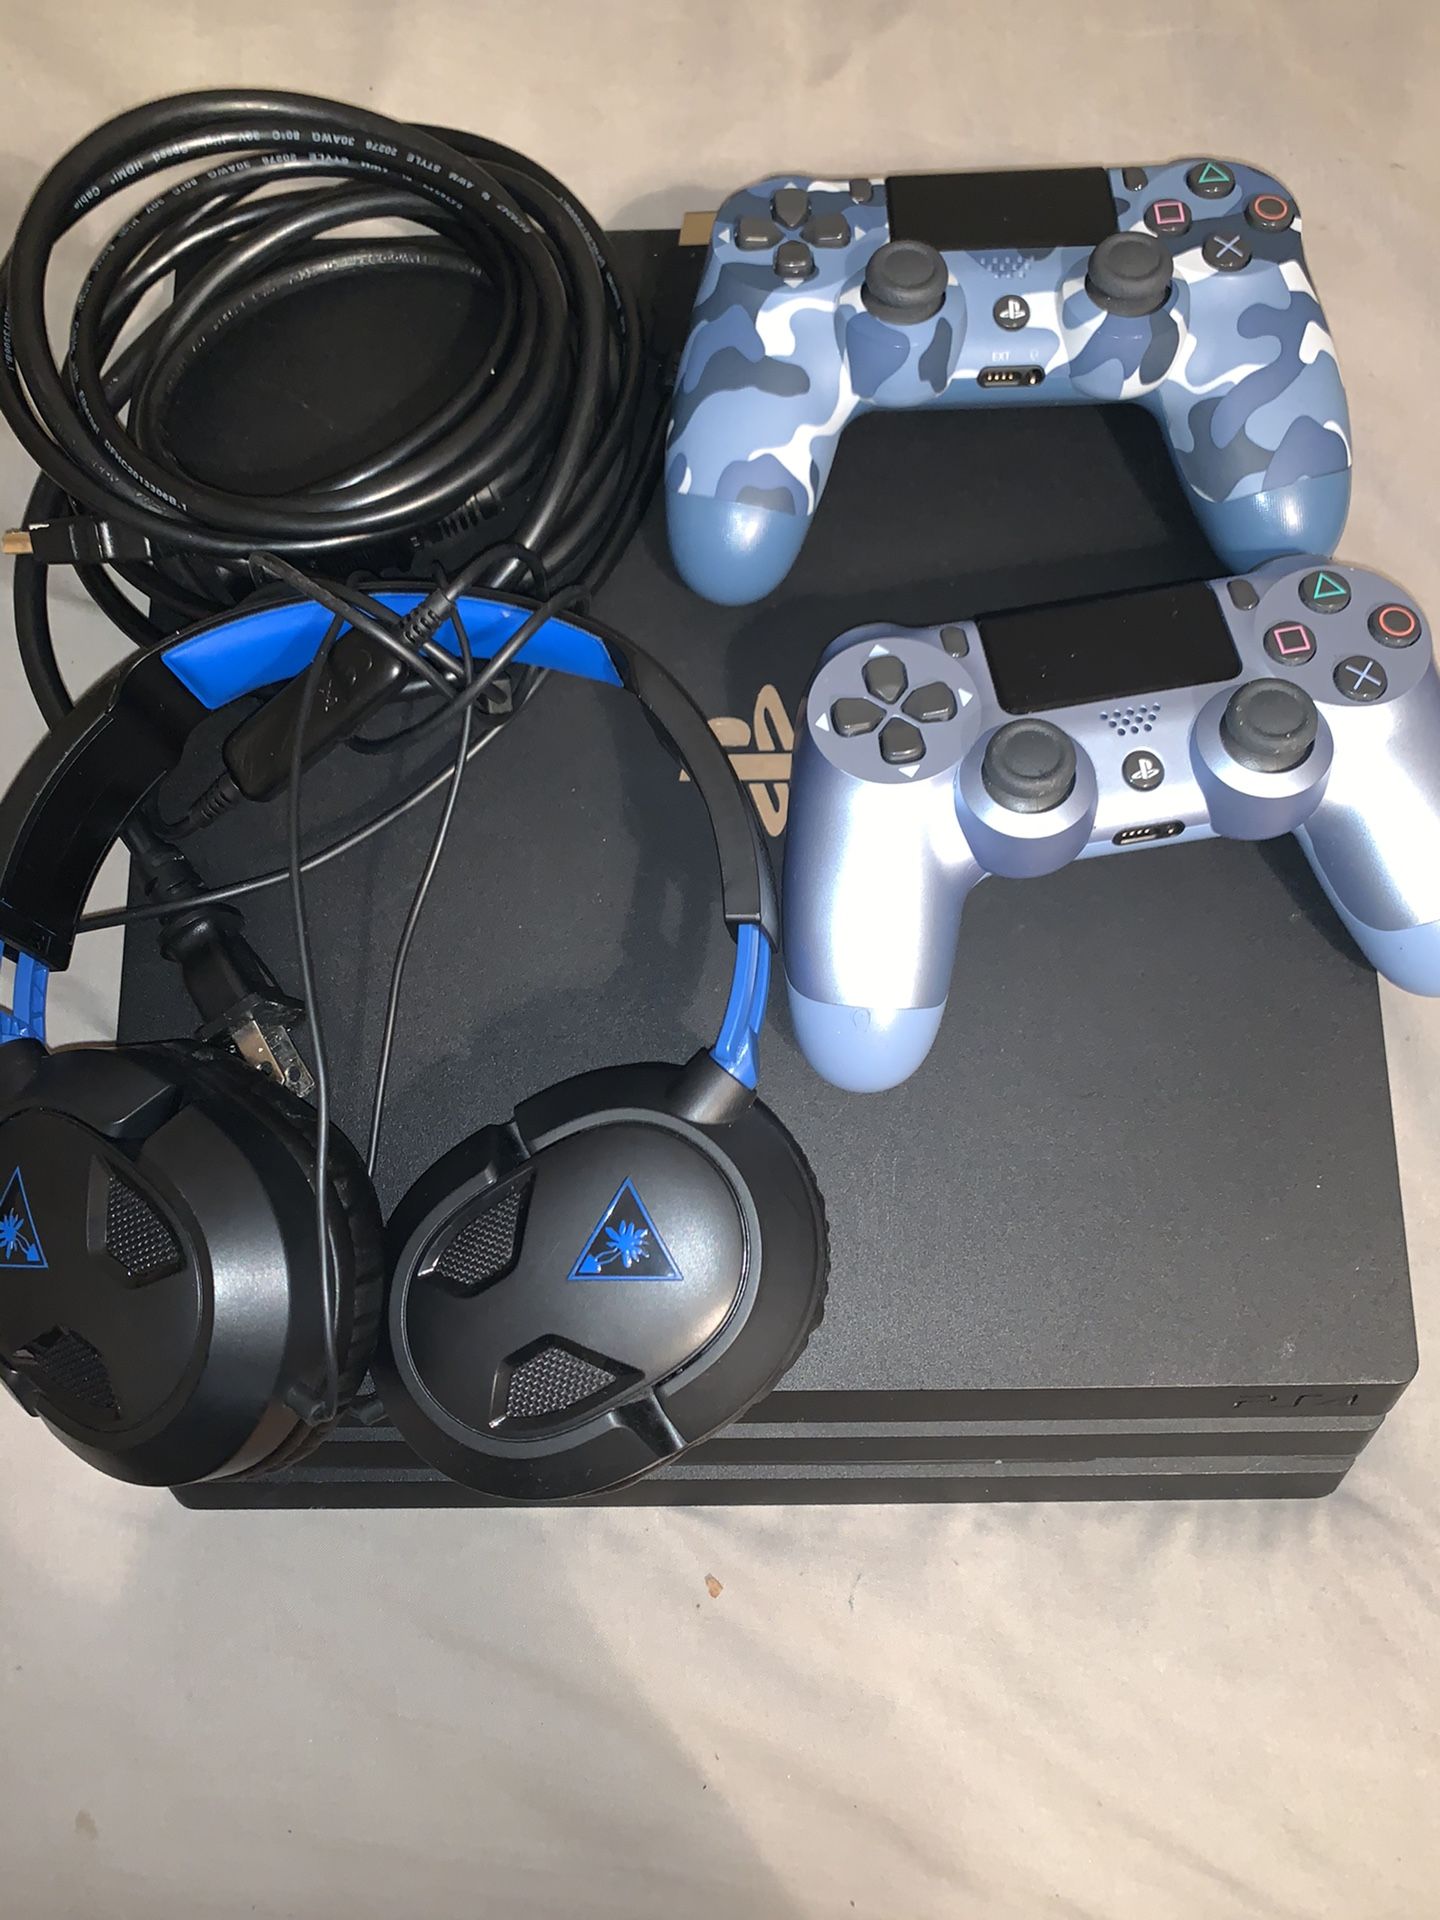 PlayStation 4 Pro 1Tb with controllers and Headset